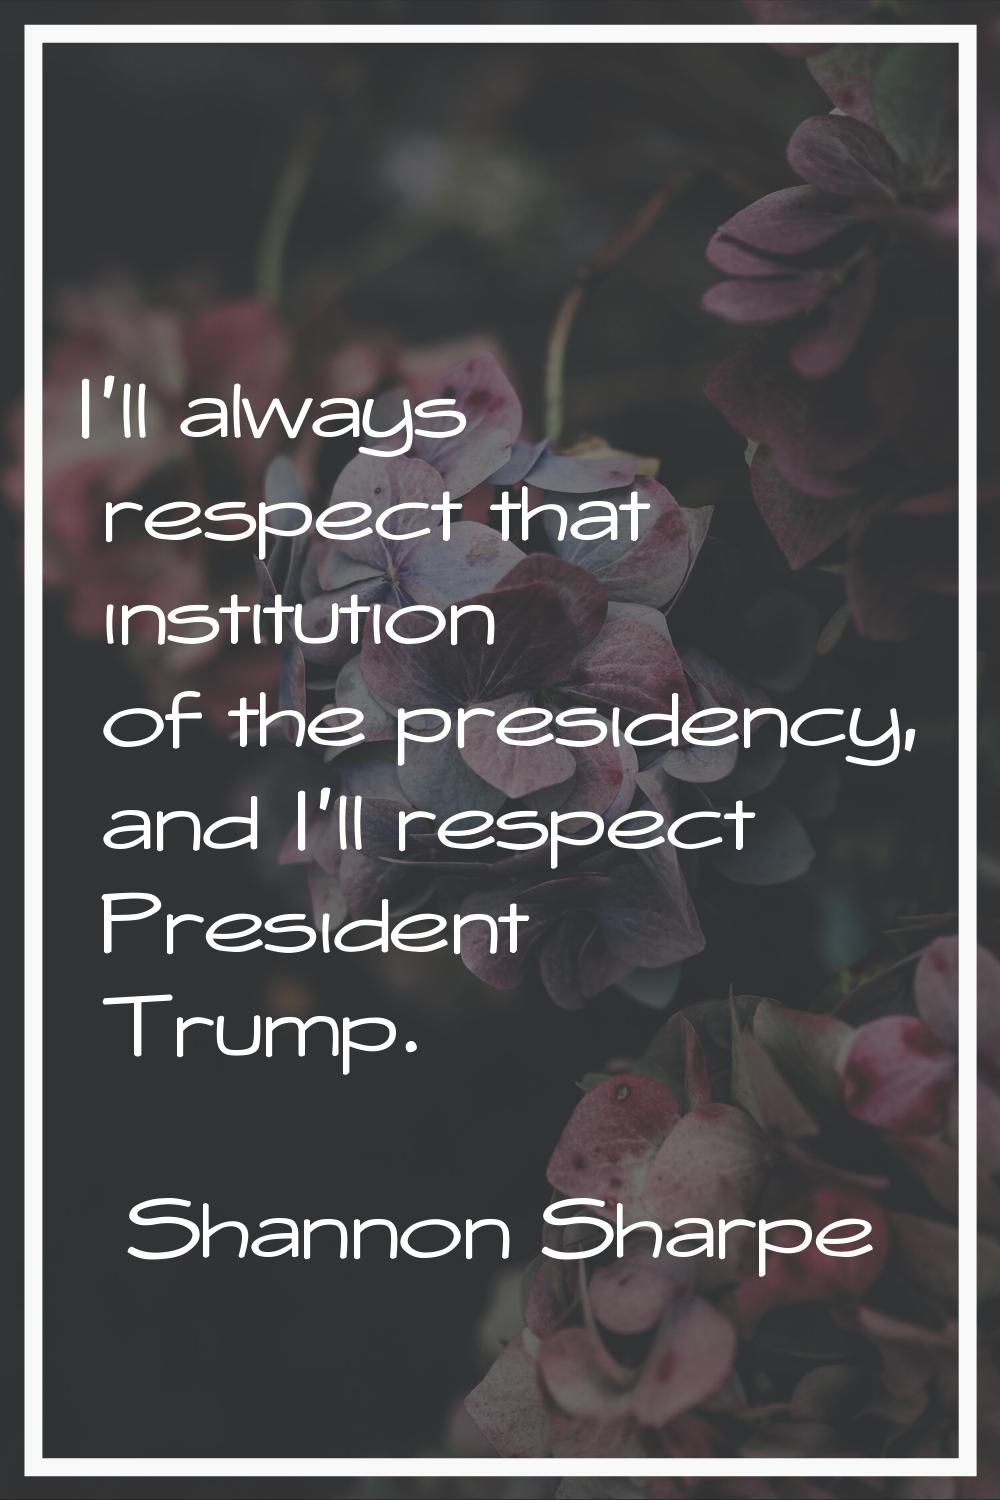 I'll always respect that institution of the presidency, and I'll respect President Trump.